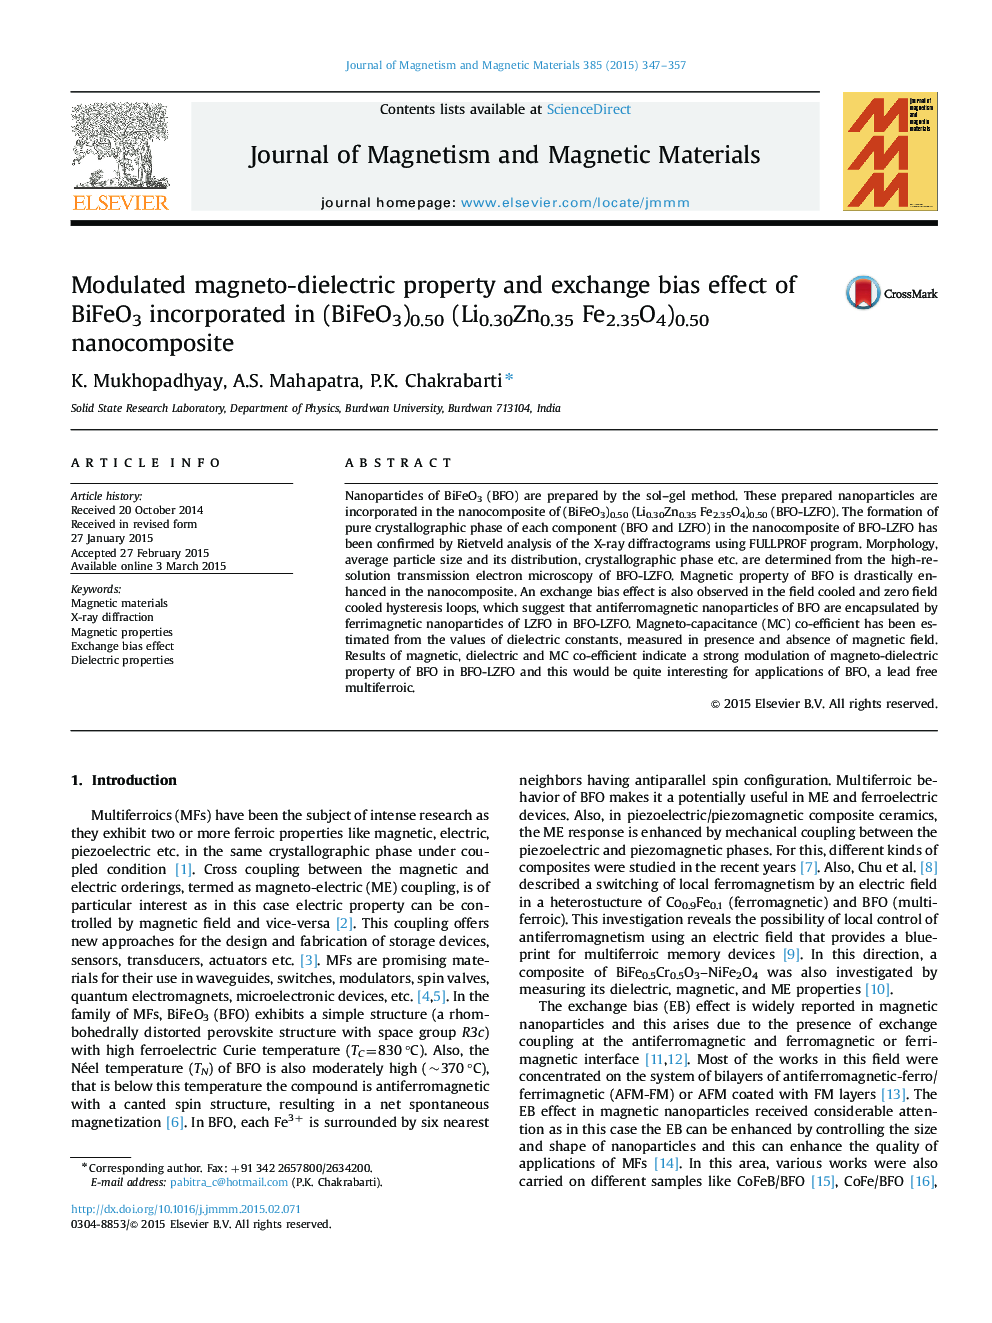 Modulated magneto-dielectric property and exchange bias effect of BiFeO3 incorporated in (BiFeO3)0.50 (Li0.30Zn0.35 Fe2.35O4)0.50 nanocomposite